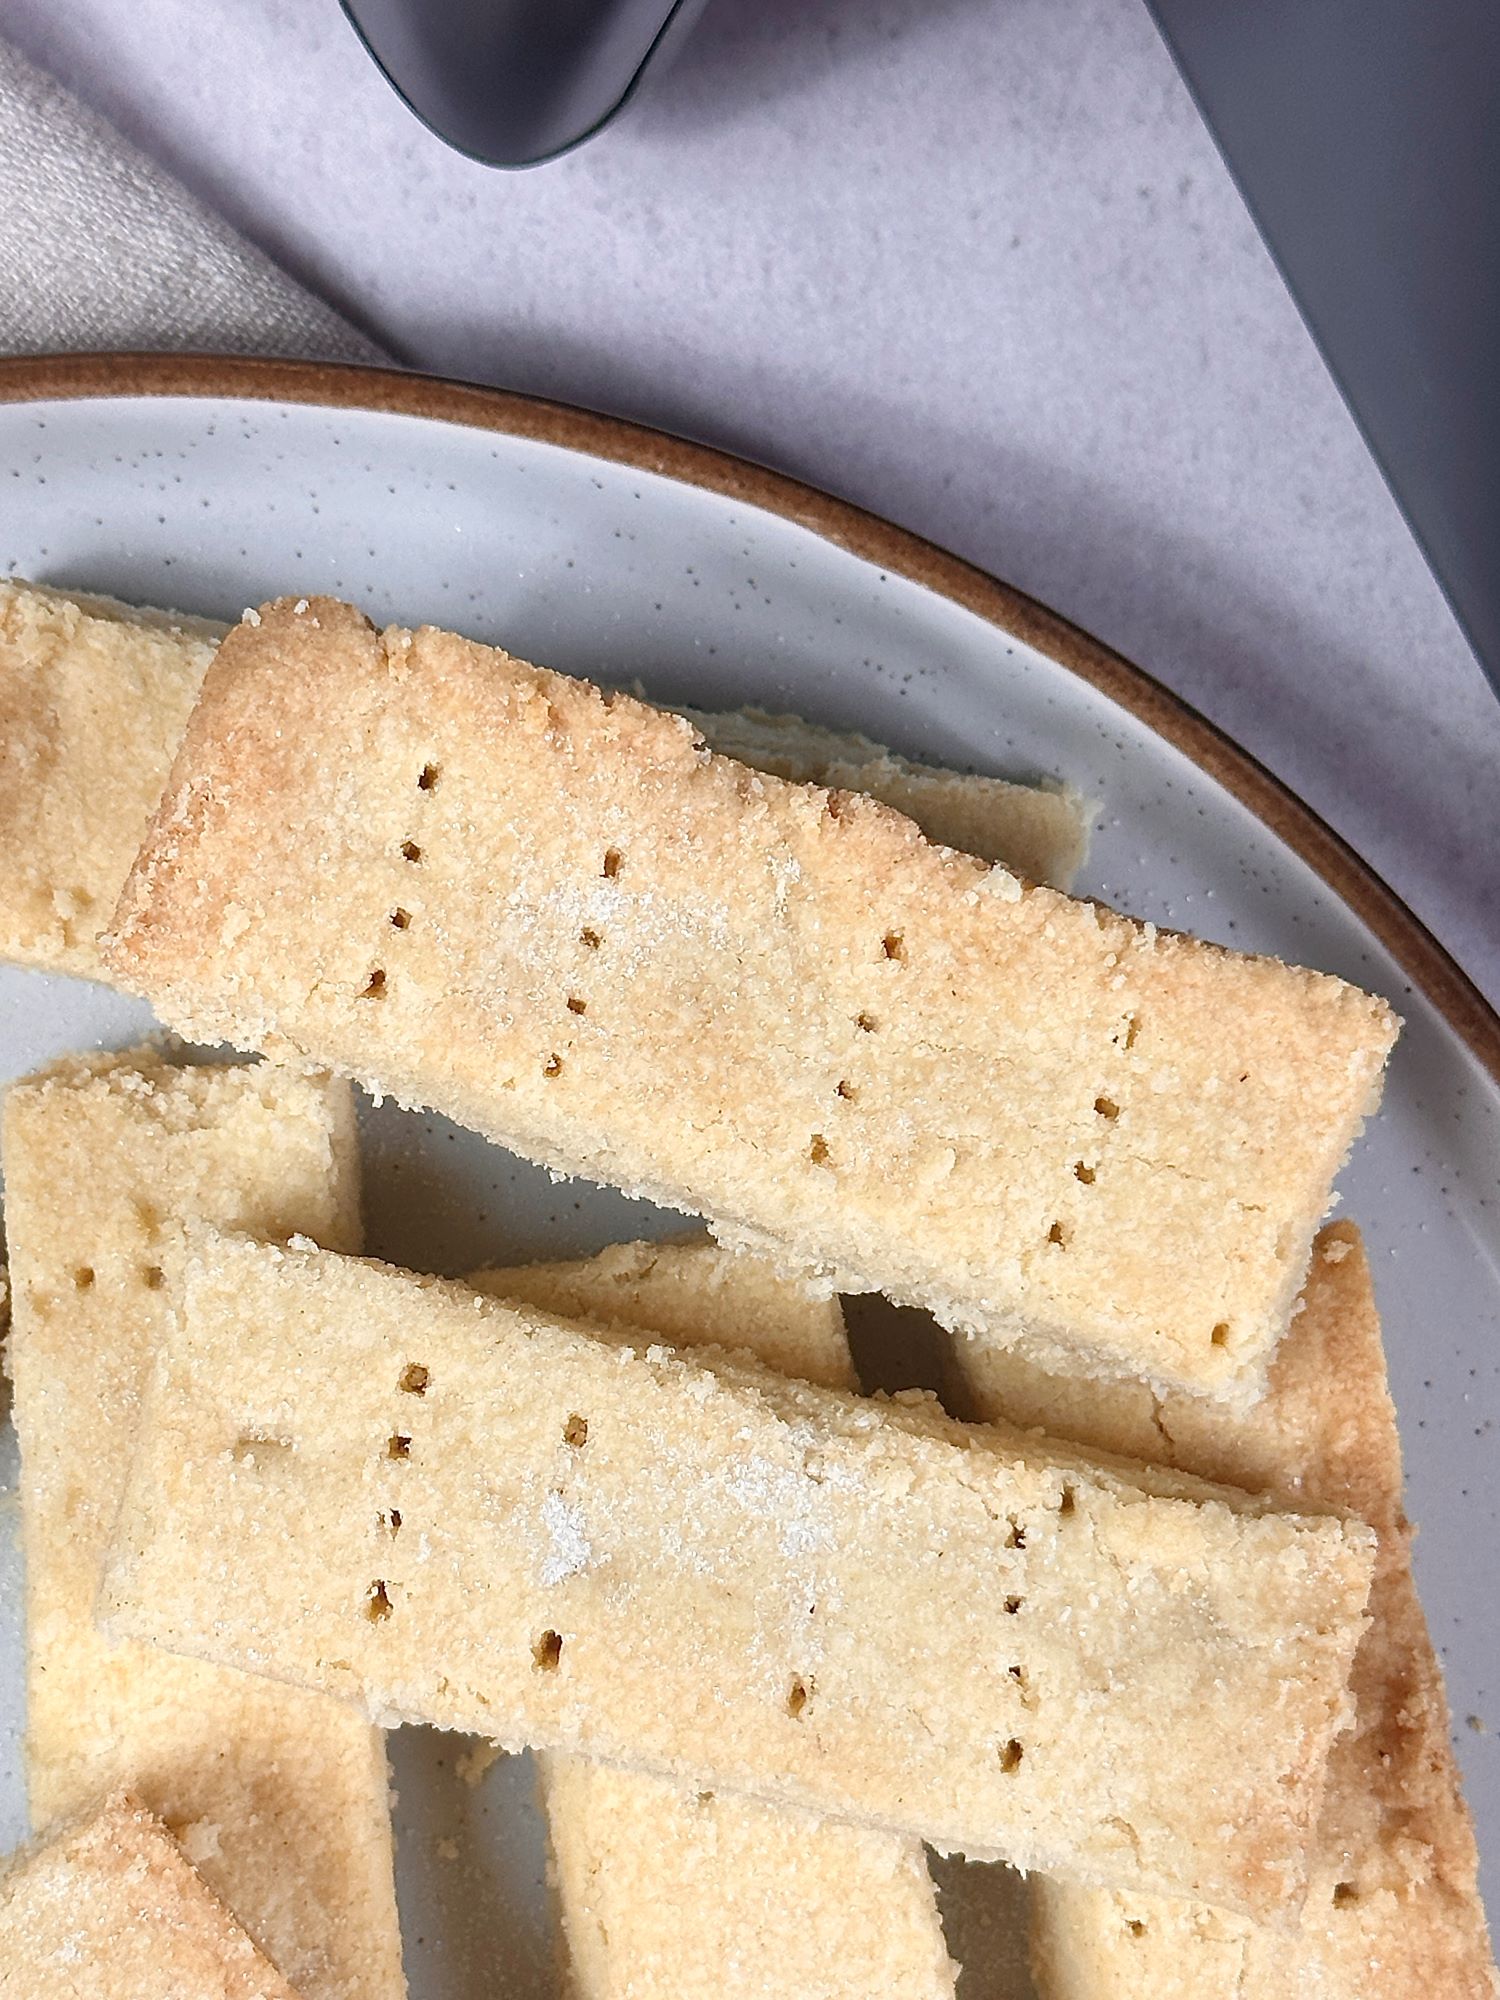 shortbread biscuits on a plate with sugar sprinkled over them next to an air fryer